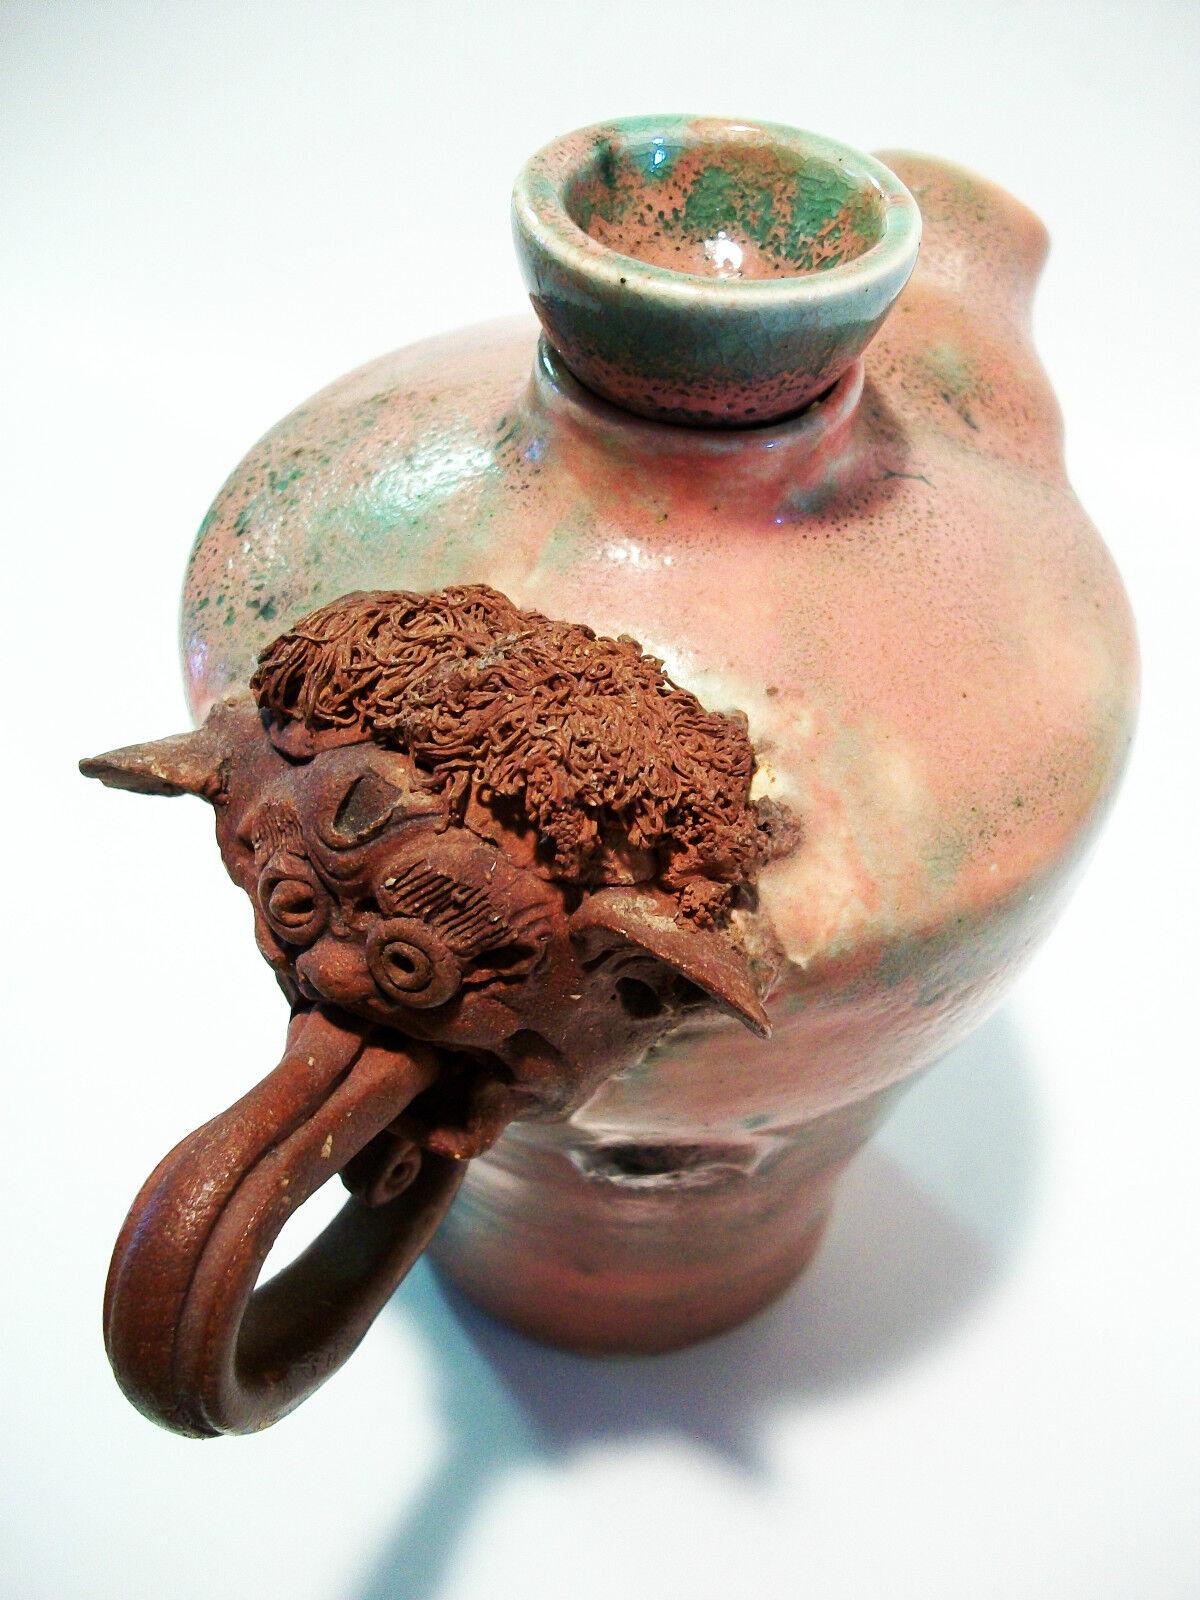 Ceramic Vintage Studio Pottery Teapot with Gargoyle Handle - Signed - Mid 20th Century For Sale